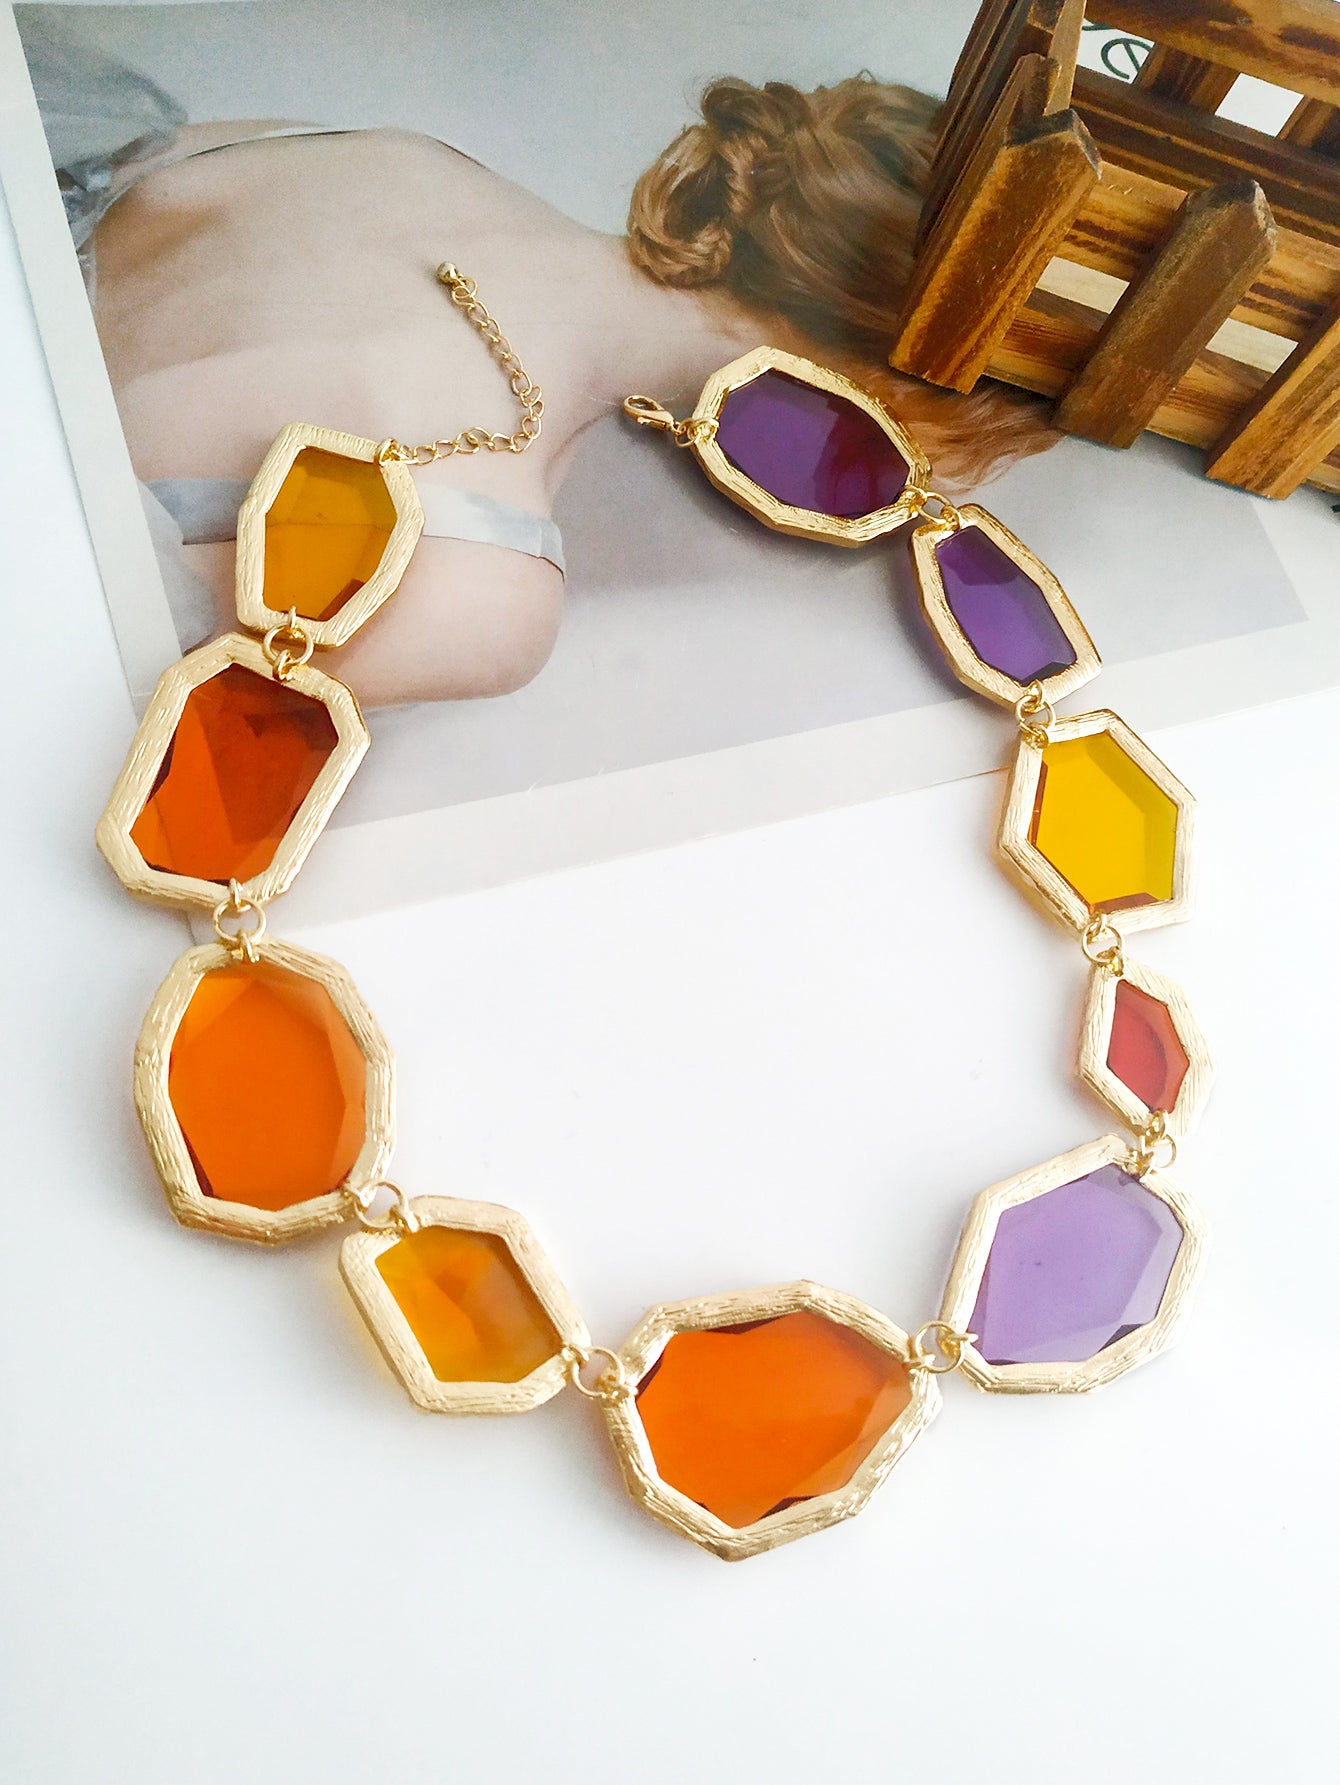 Wilma- the Chunky Glass Look Statement Necklace 2 Color Ways